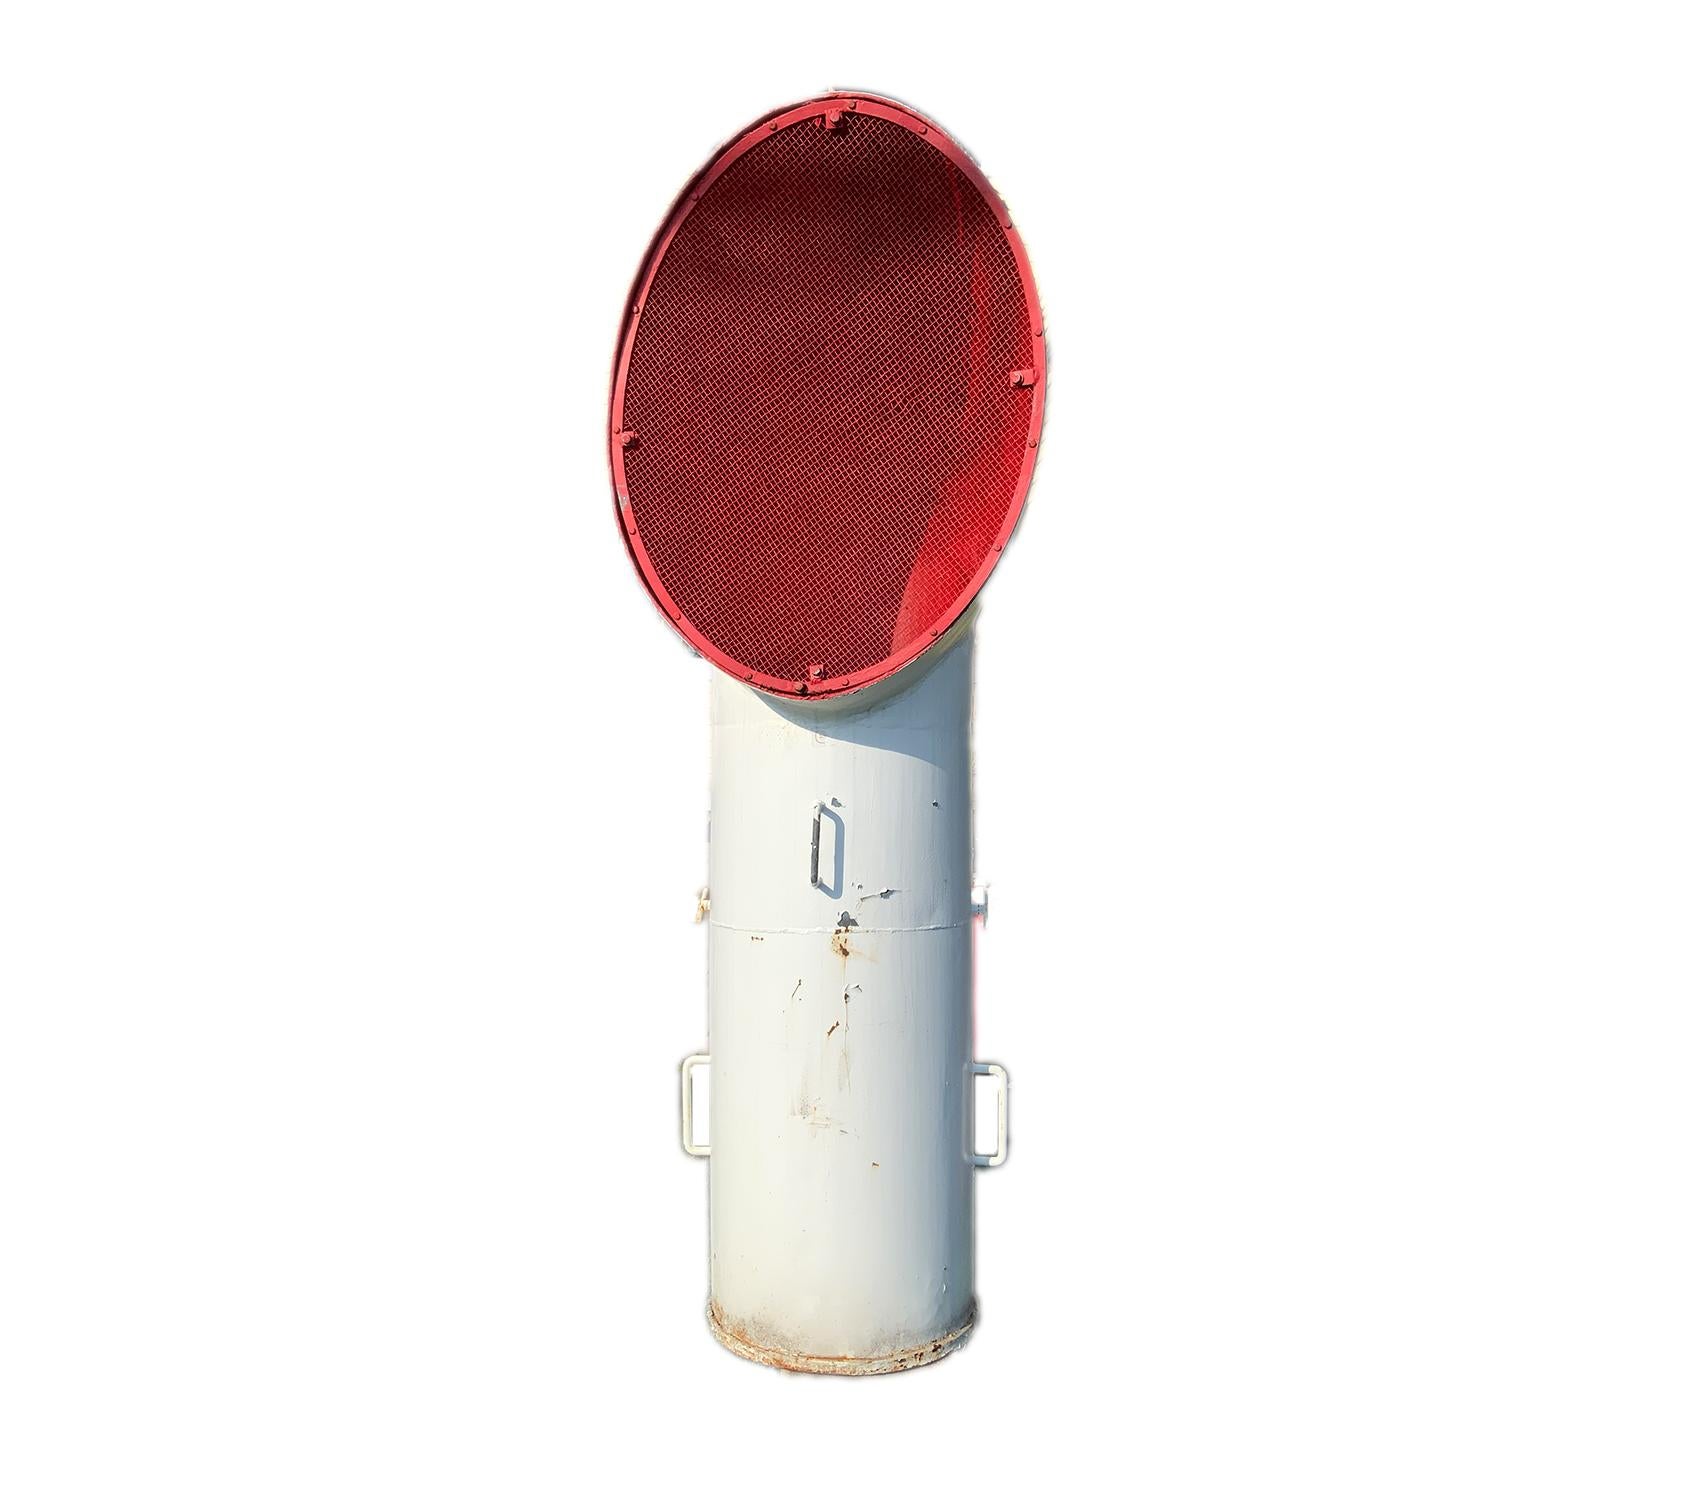 Incredibly decorative and huge ships ventilator funnel. Painted white with red interior. Also has a red steel screen. Fitted with three handles.

Weight: 140 lbs
Overall Dimensions: 87